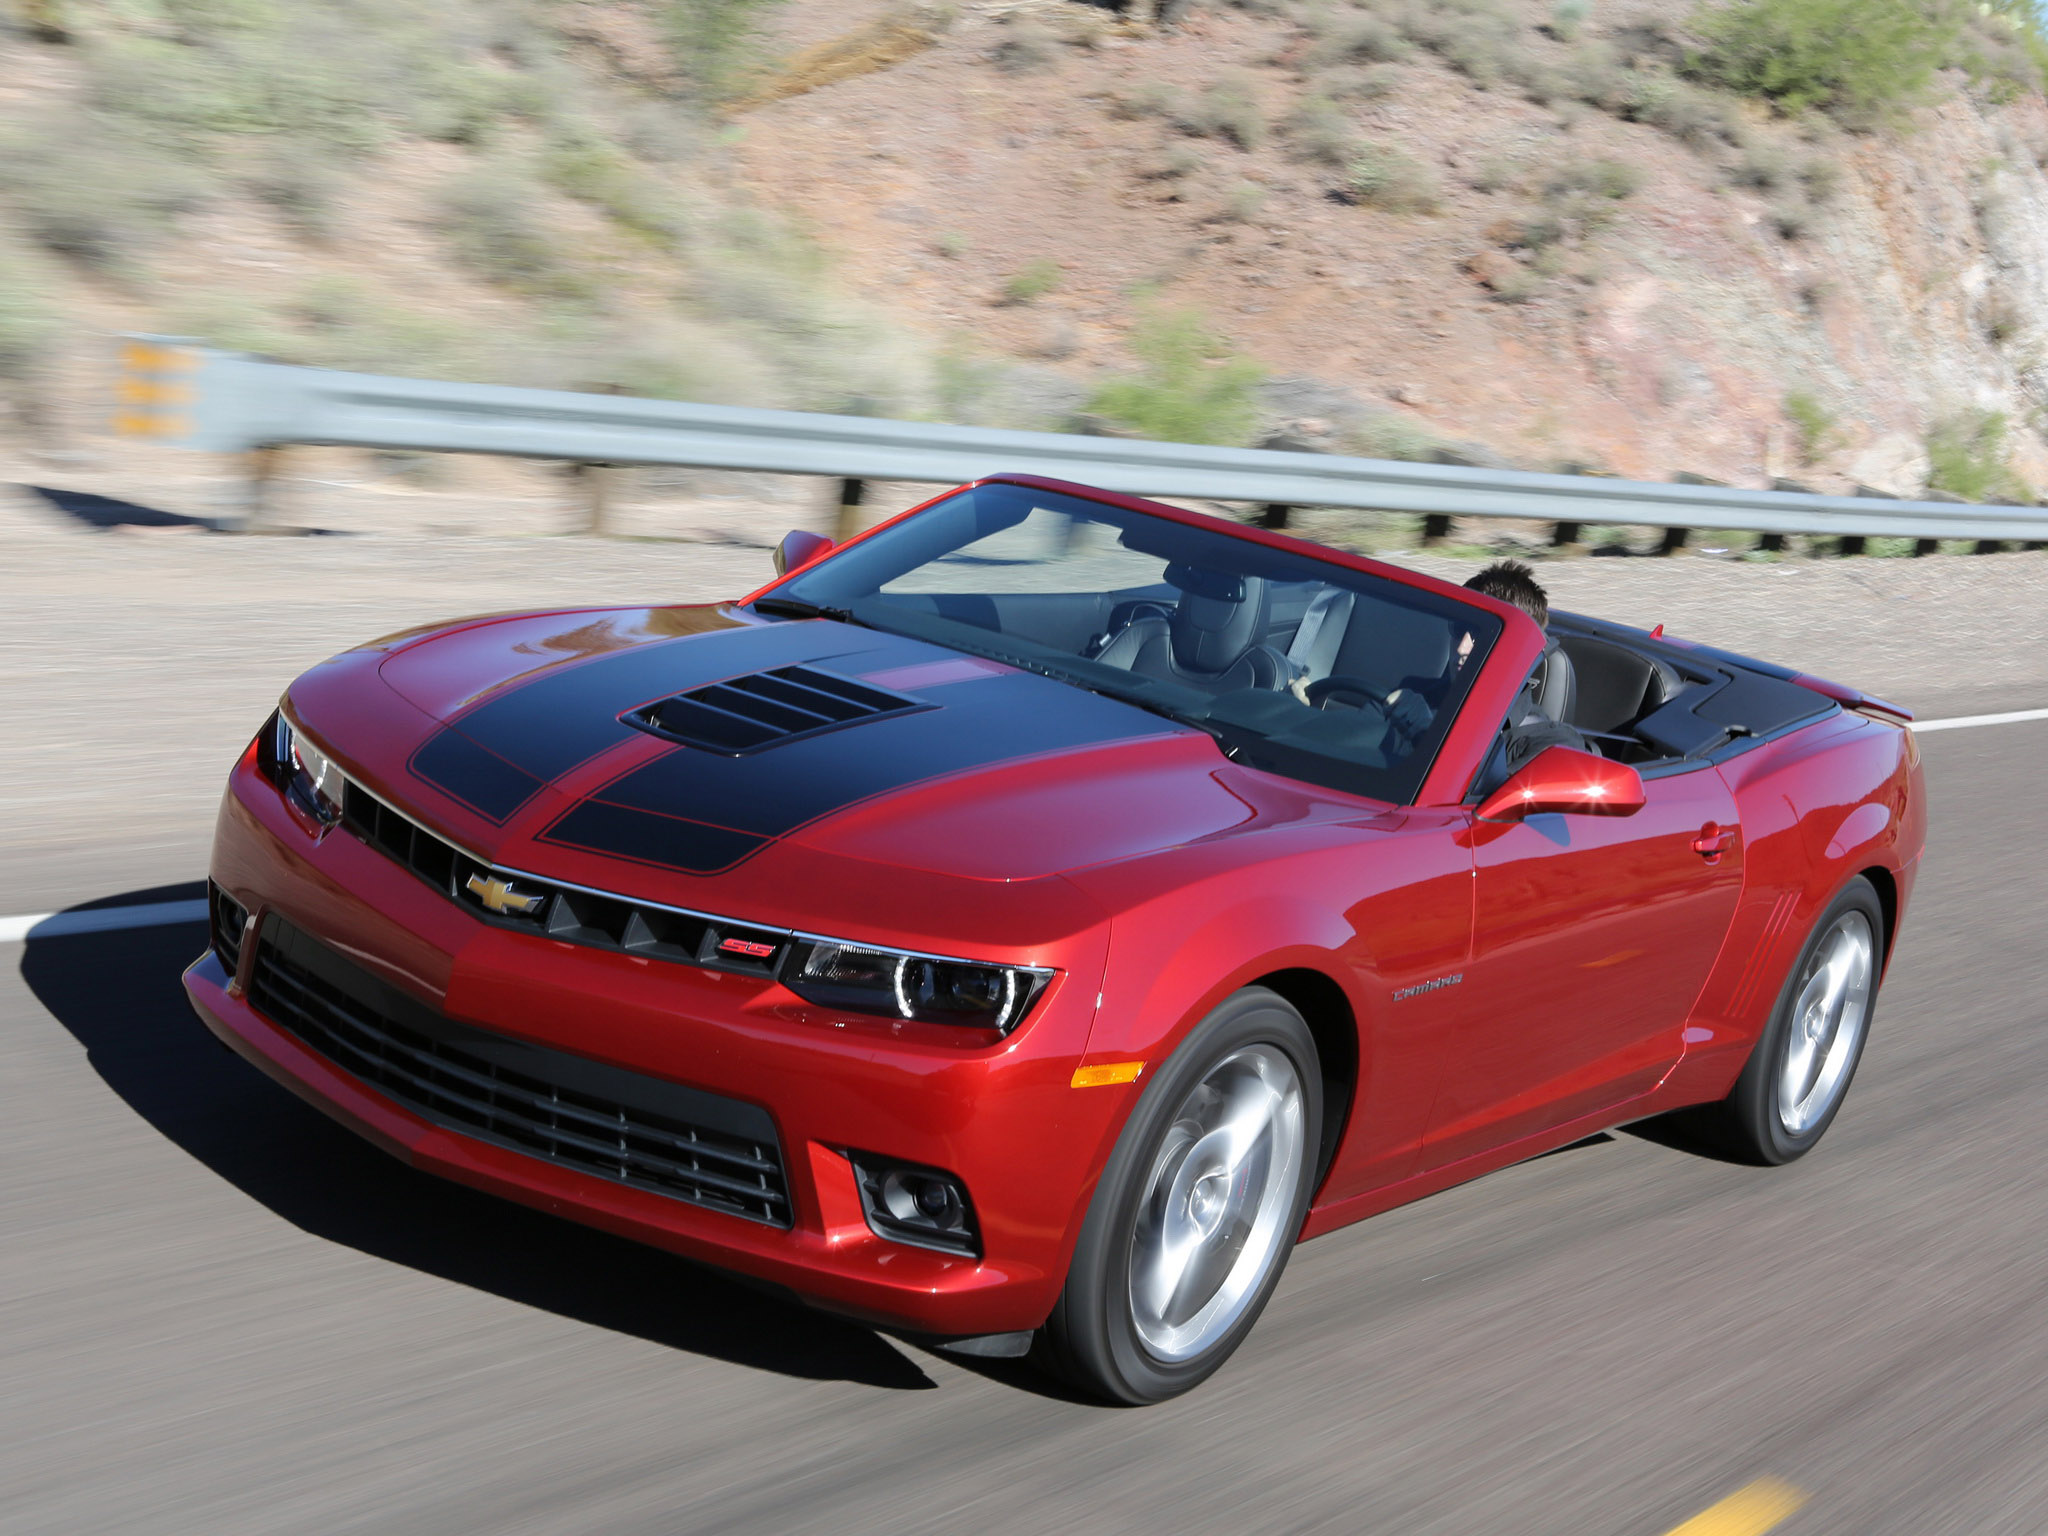 2014, Chevrolet, Camaro, Ss, Convertible, Muscle, S s Wallpaper